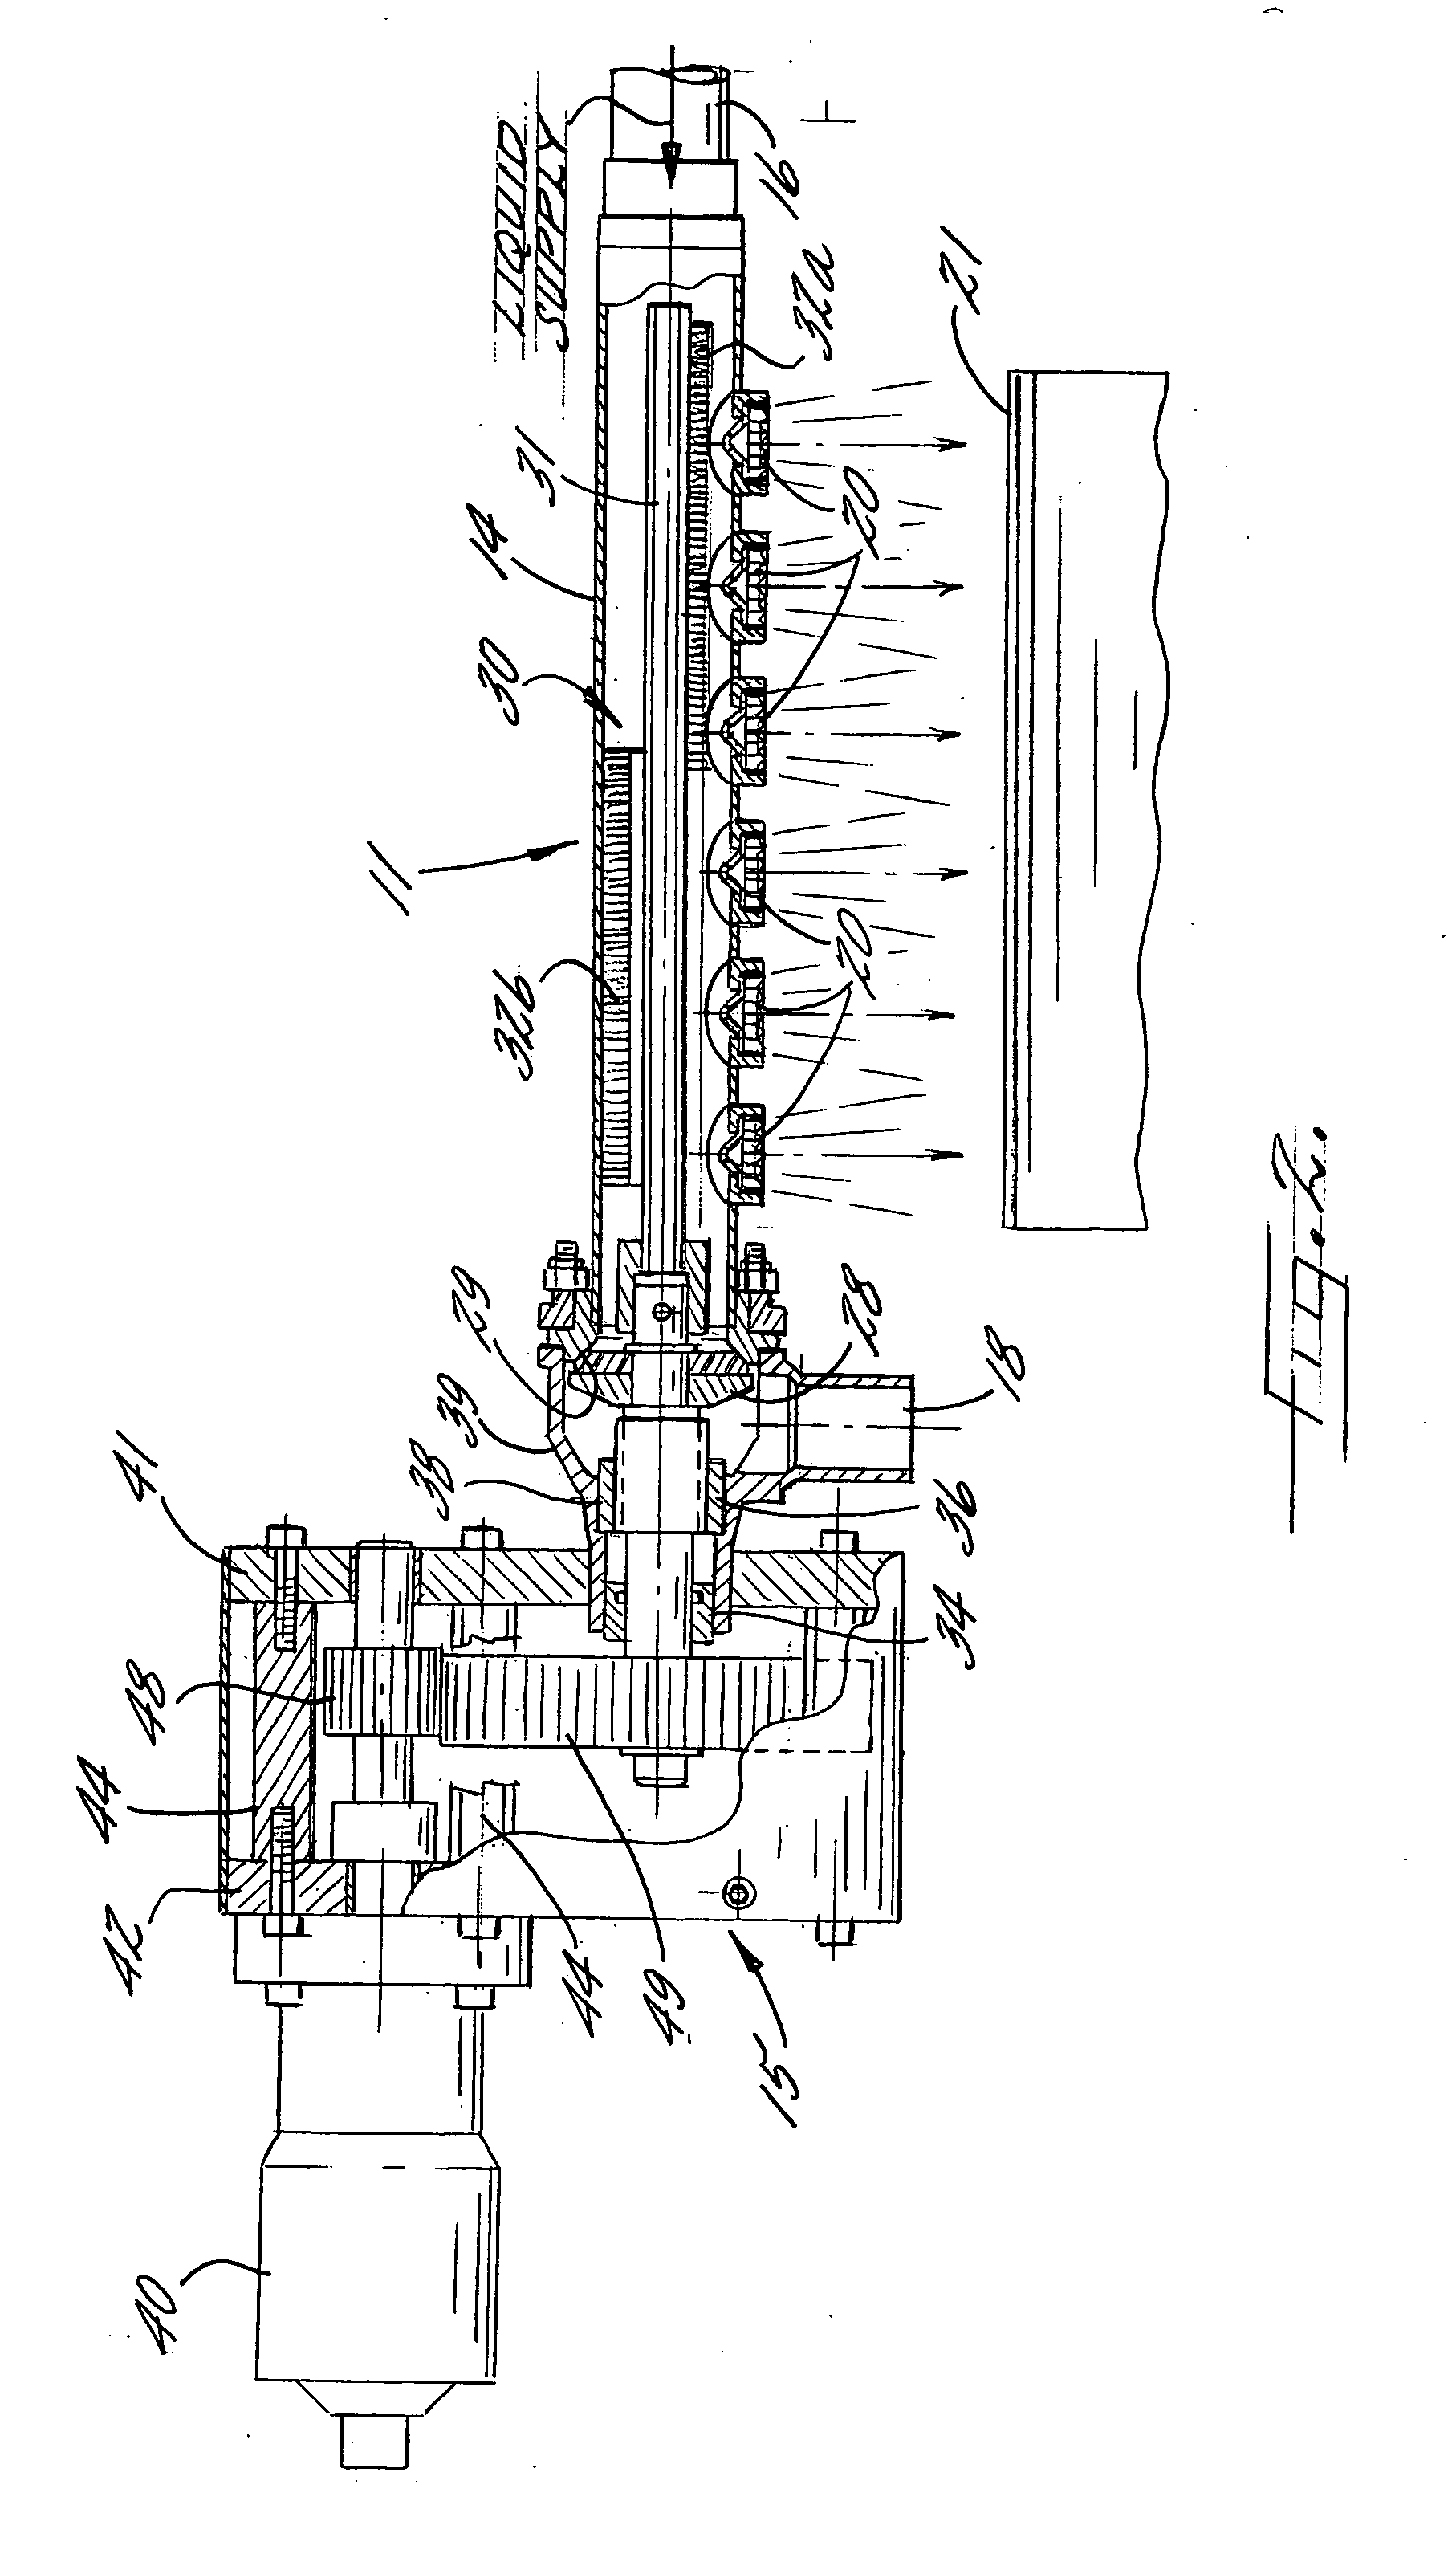 Spraying system with automated nozzle cleaning device